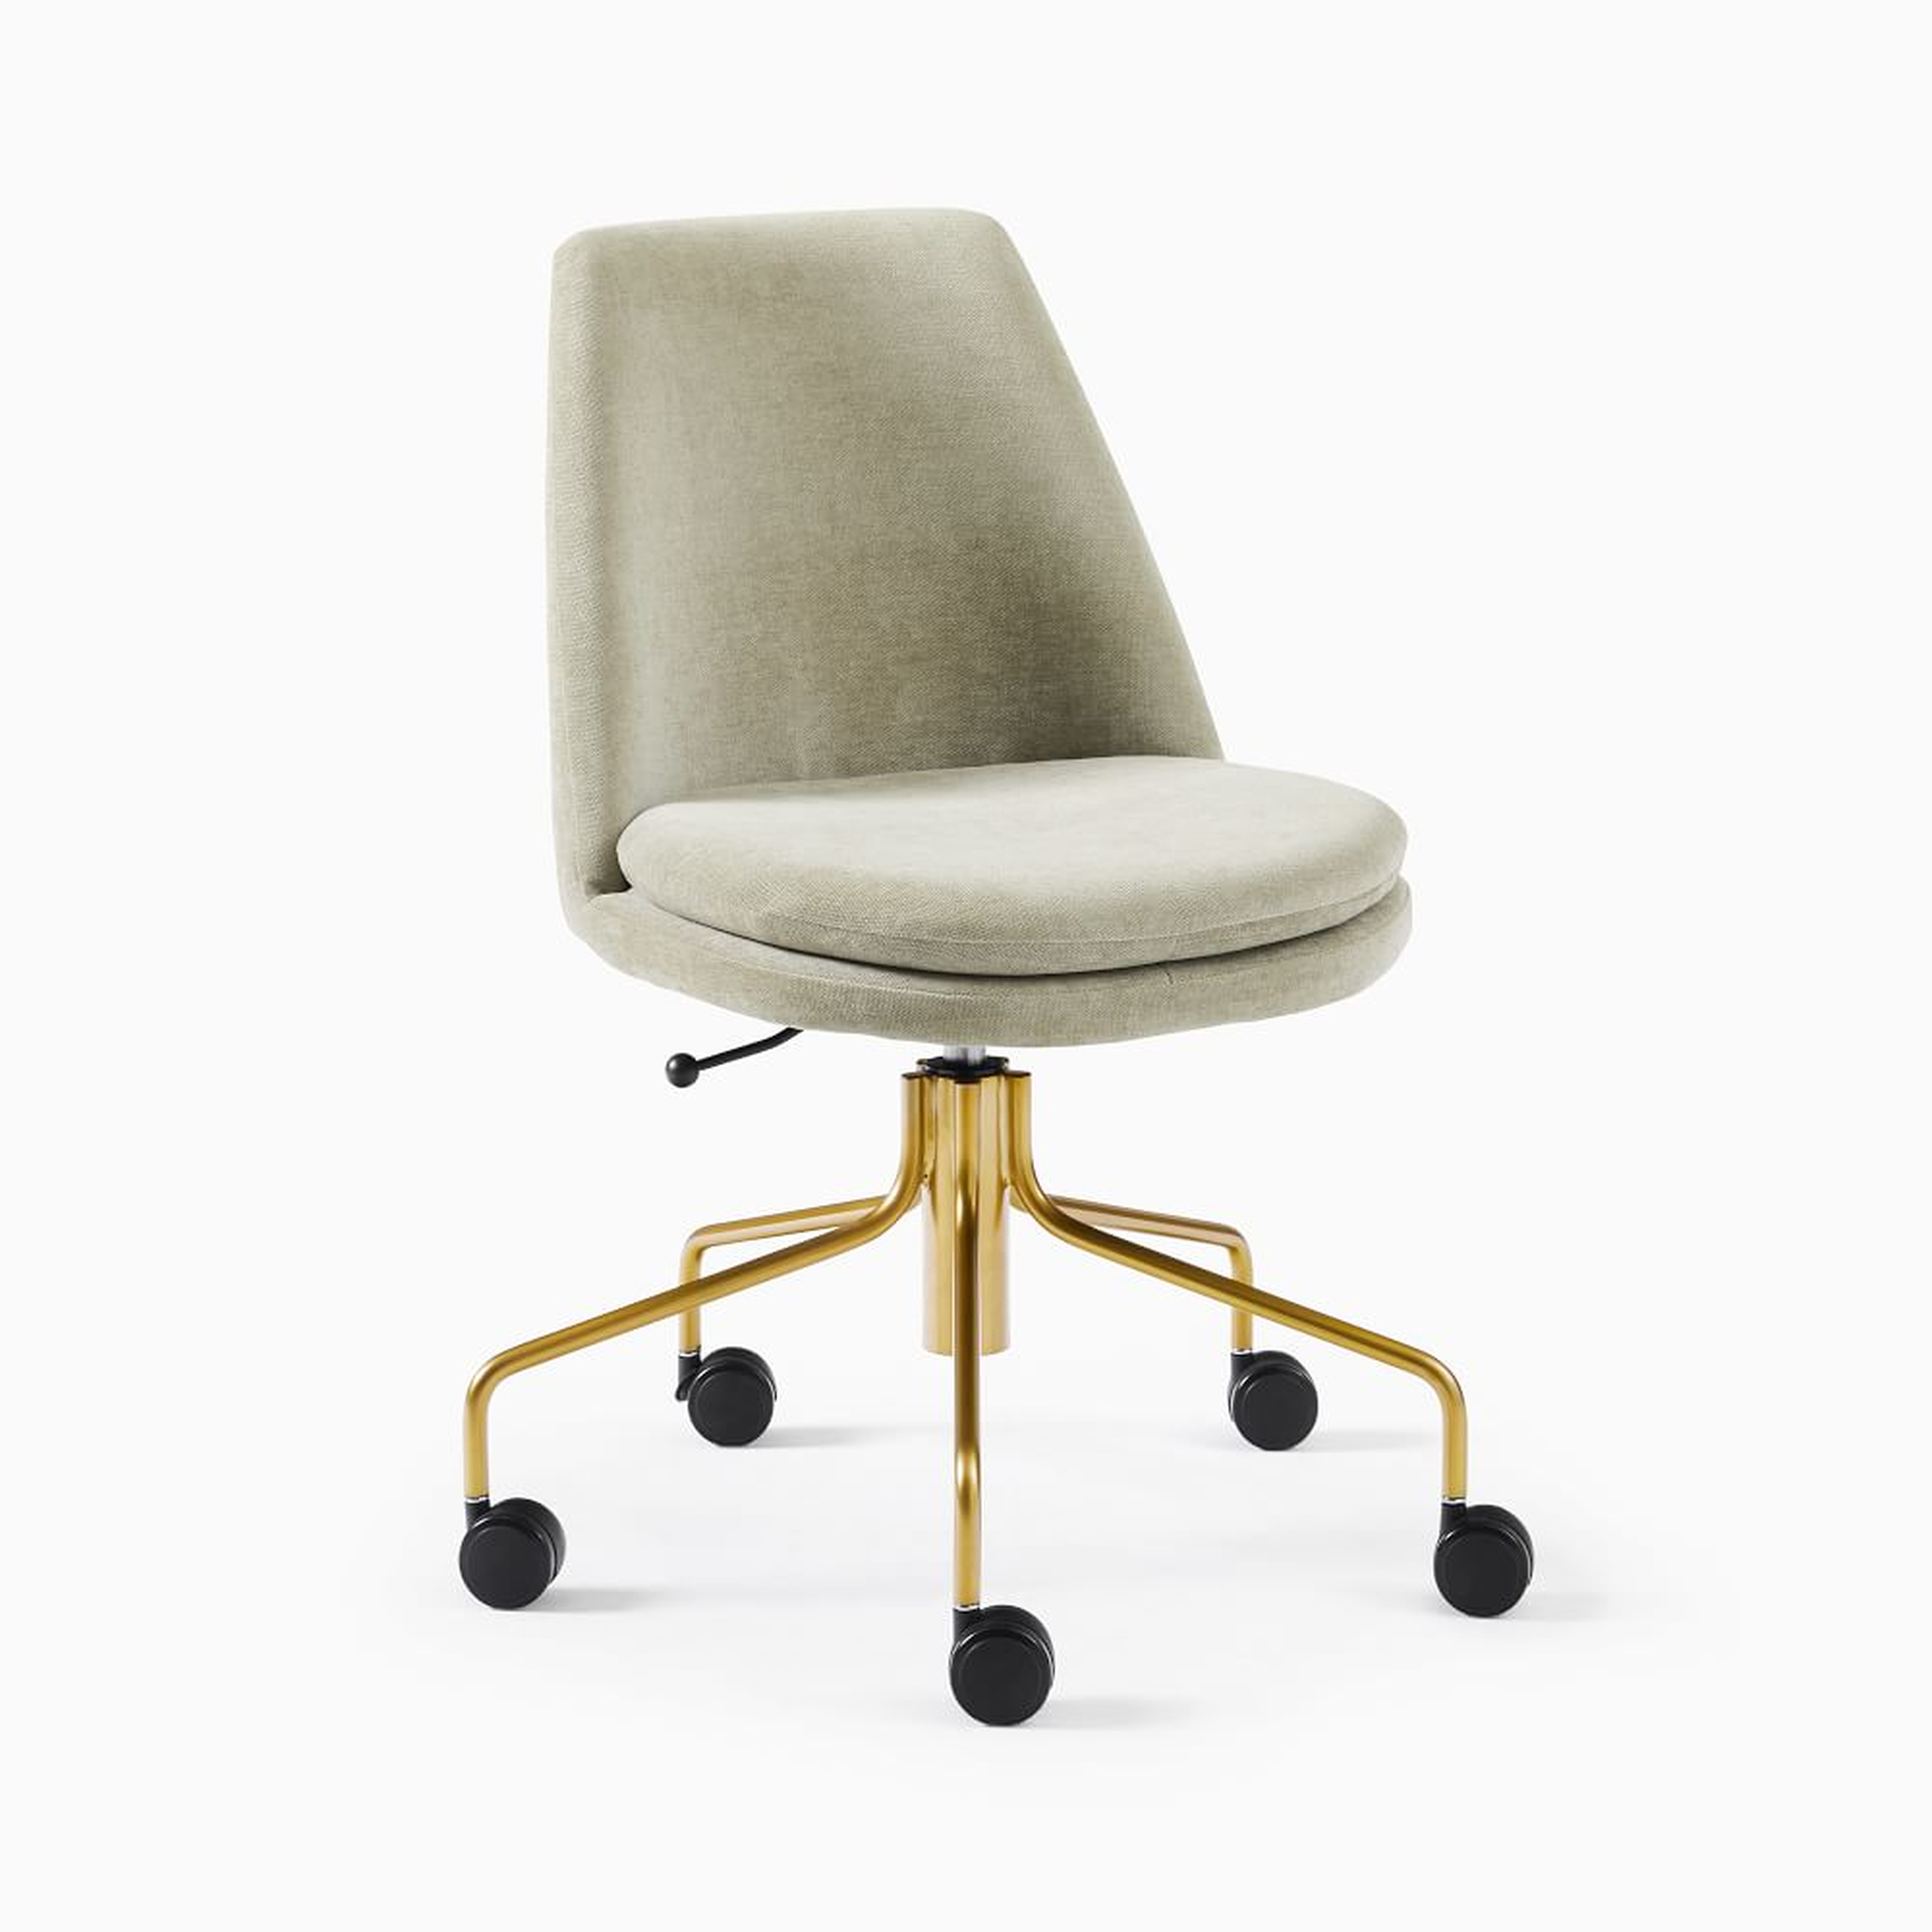 Finley Collection Office Chair, Distressed Velvet, Light Taupe, Antique Brass - West Elm